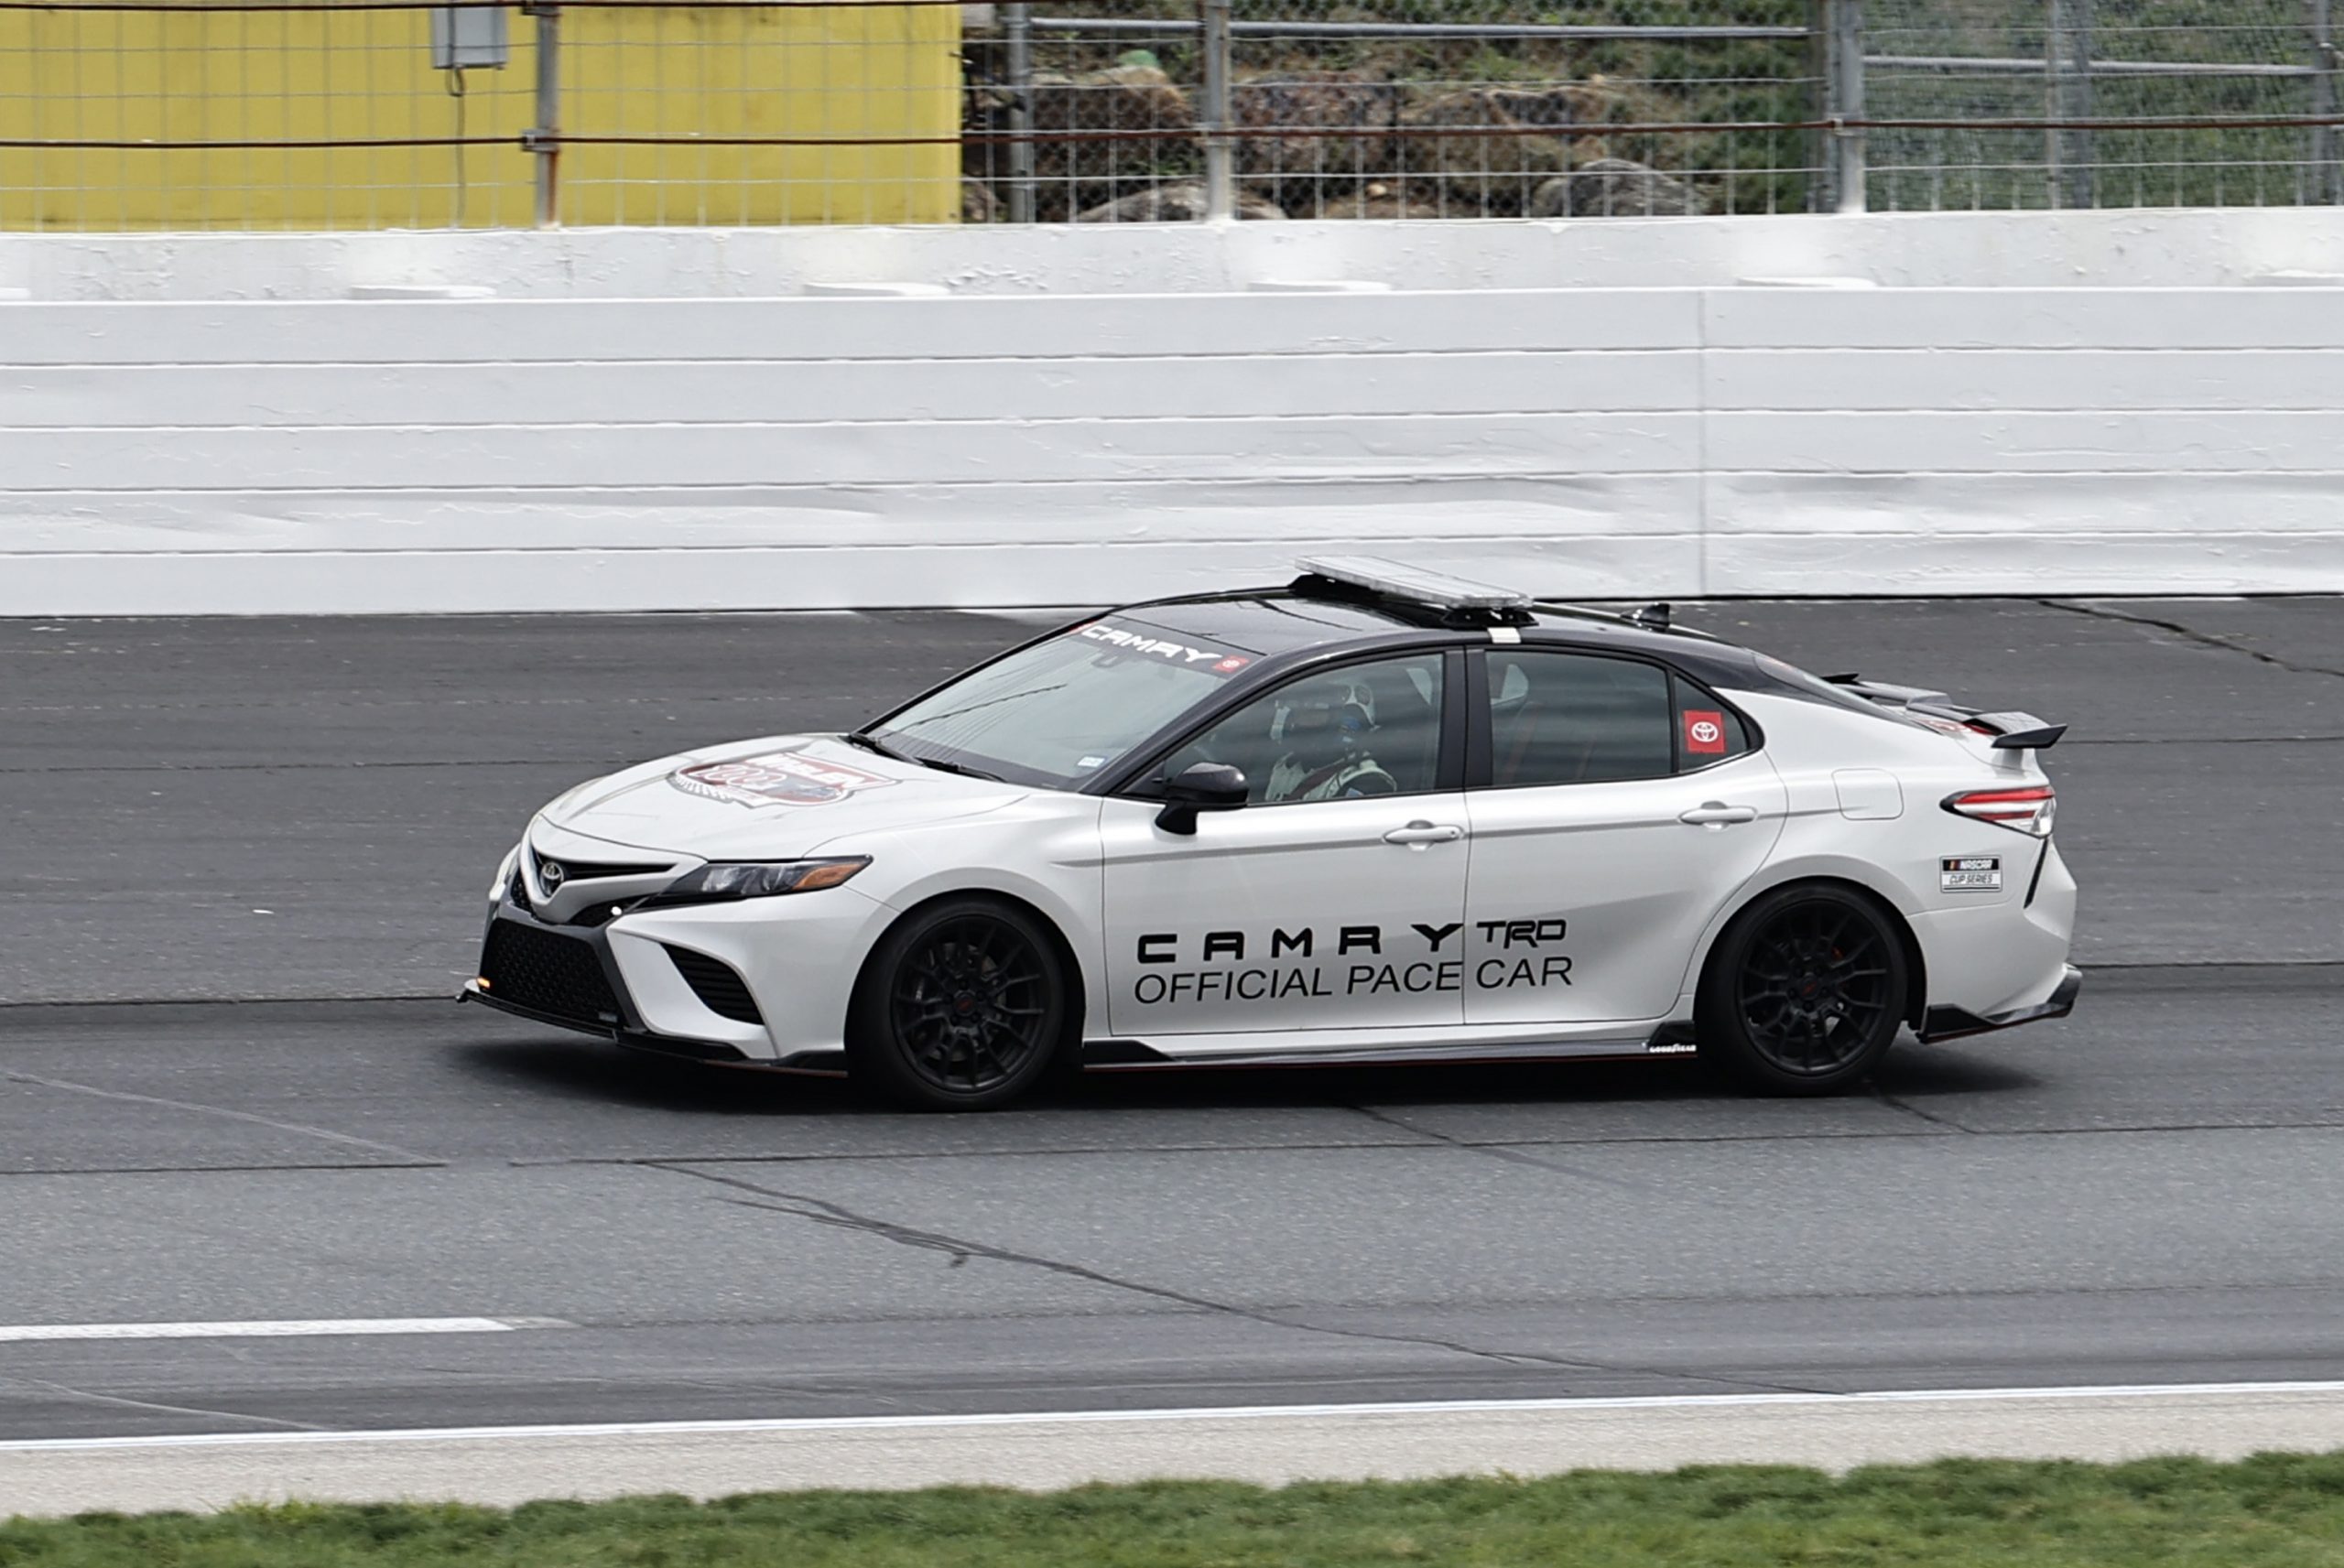 A white Toyota Camry sedan pace car at the New Hampshire Motor Speedway